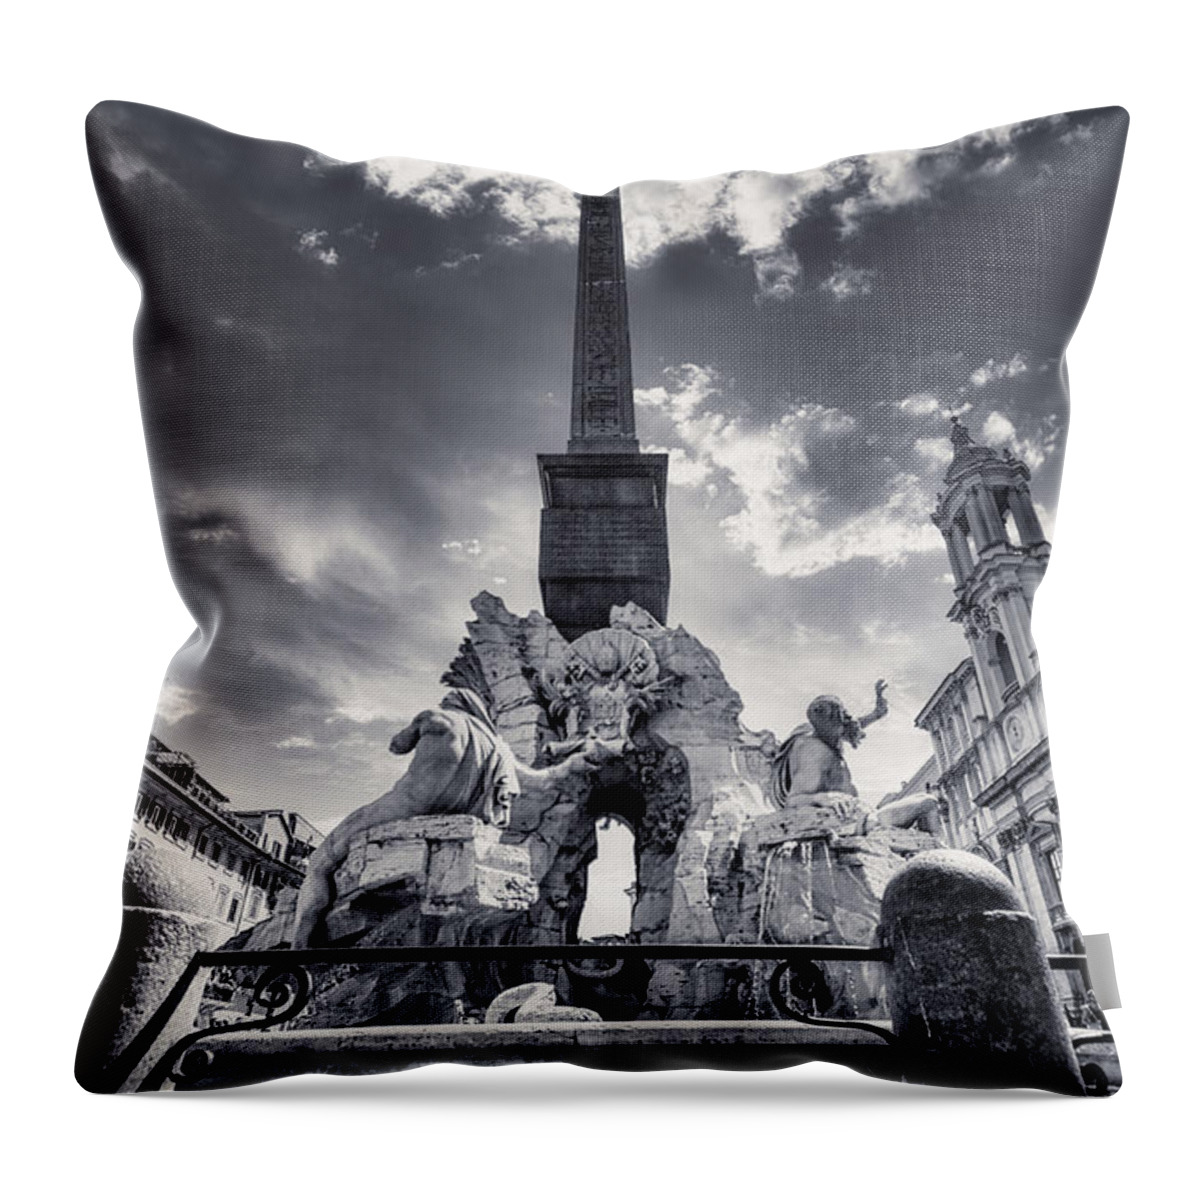 Piazza Navona Throw Pillow featuring the photograph Rome BW - Fountain Of The Four Rivers In Piazza Navona 2 by Stefano Senise